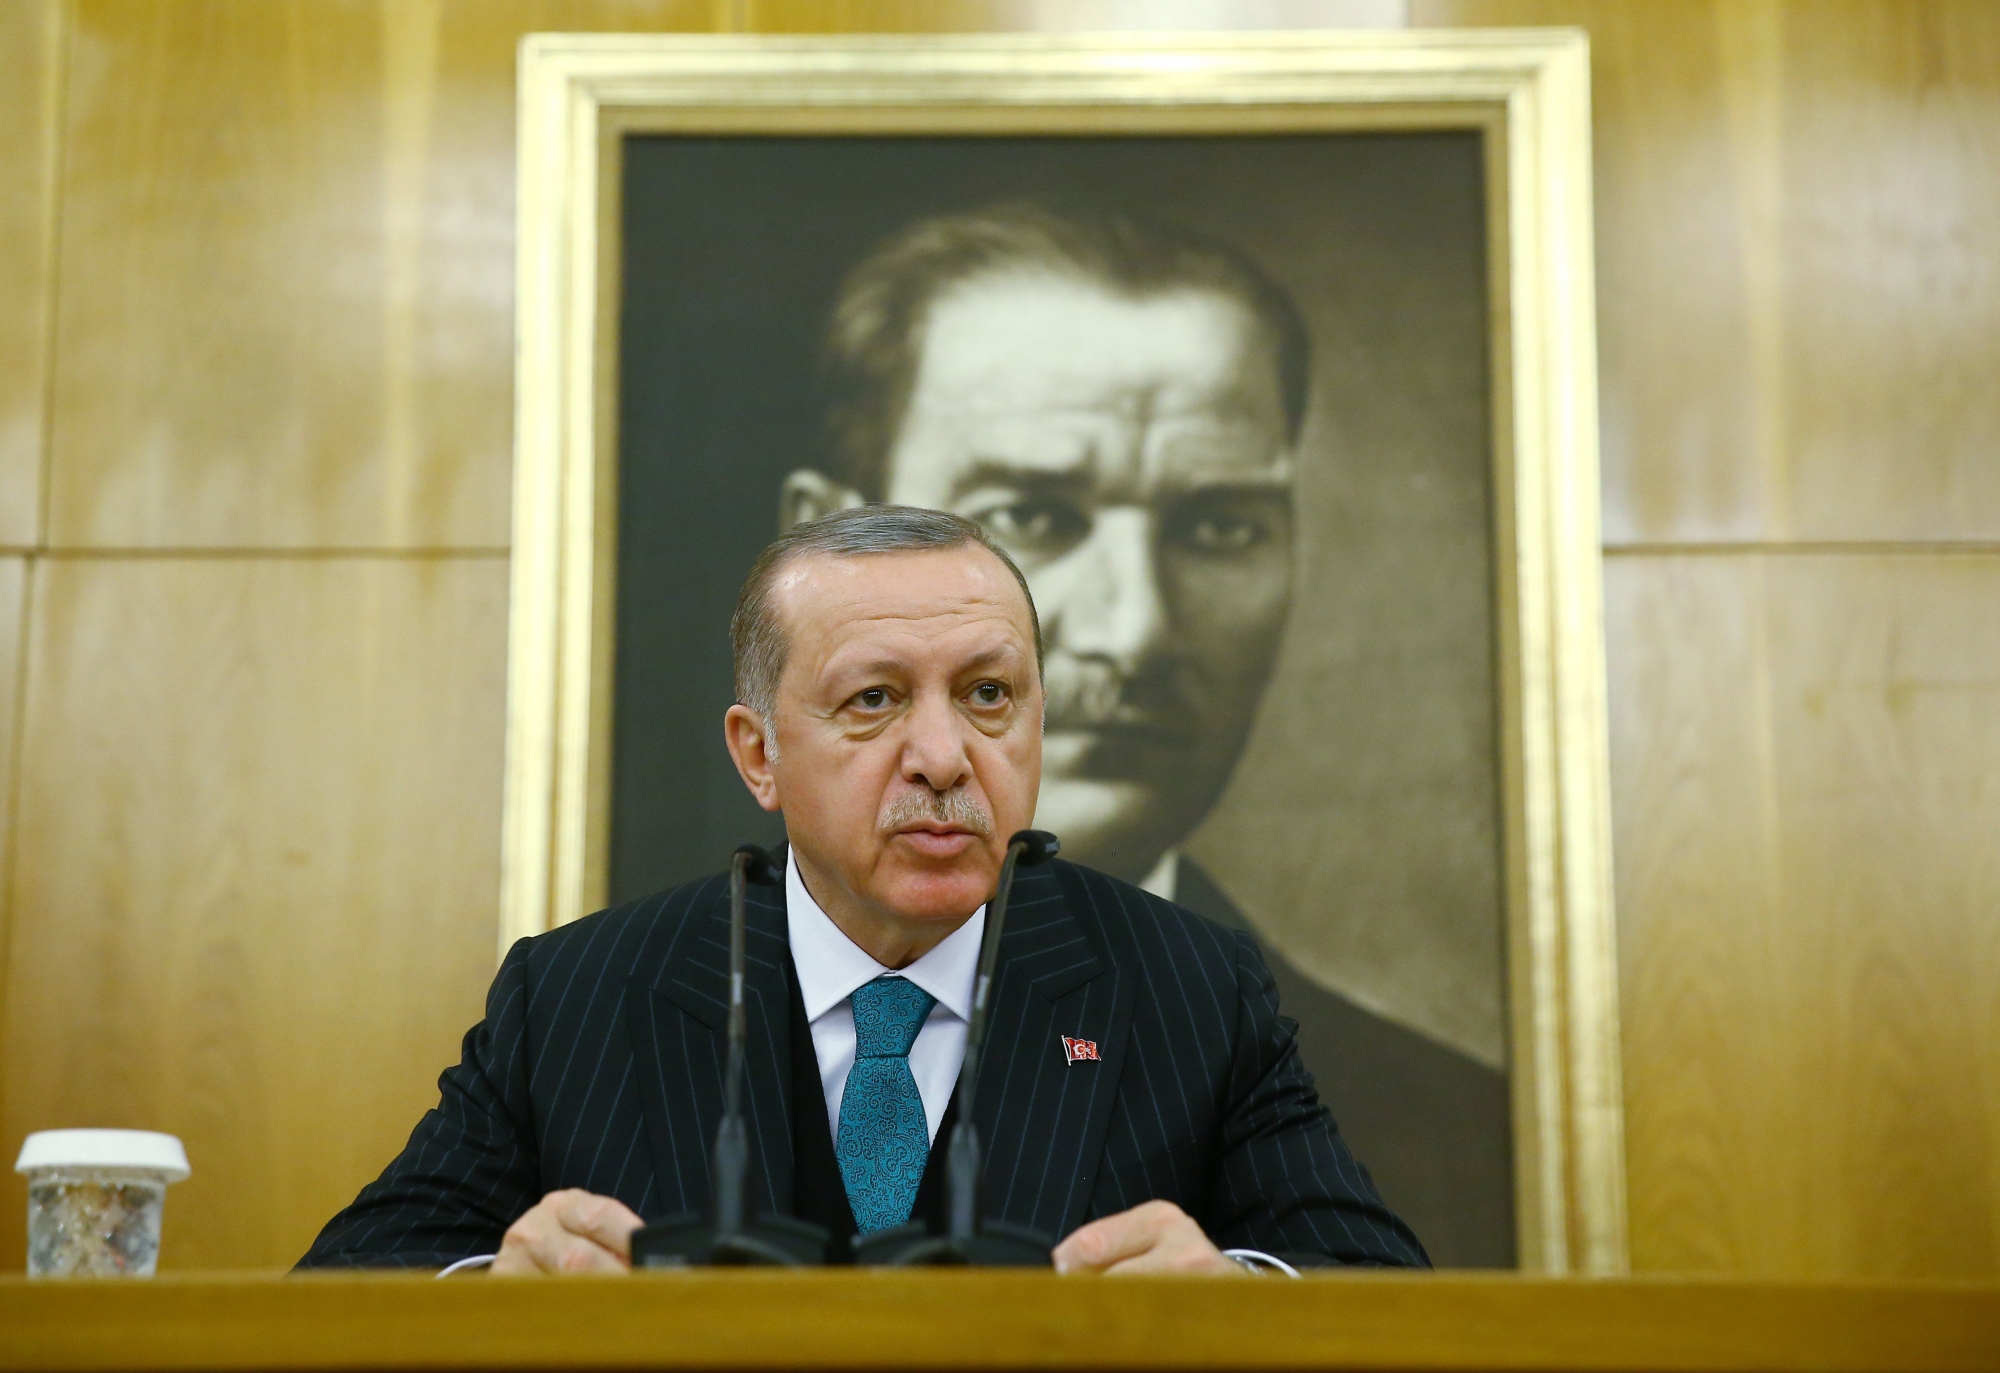 epa06632498 A handout photo made available by the Turkish Presidential Press Office on 27 March shows Turkish President Recep Tayyip Erdogan speaking to the media in front of the Ataturk's picture at Ataturk airport in Istanbul, Turkey, 26 February 2018, before travelling to Algeria. According to news report Turkish President Recep Tayyip Erdogan passed Mustafa Kemal Ataturk (founder of modern Turkey) as longest ruling Turk.  EPA/TURKISH PRESIDENTAL PRESS OFFICE / HANDOUT  HANDOUT EDITORIAL USE ONLY/NO SALES TURKEY PRESIDENT ERDOGAN